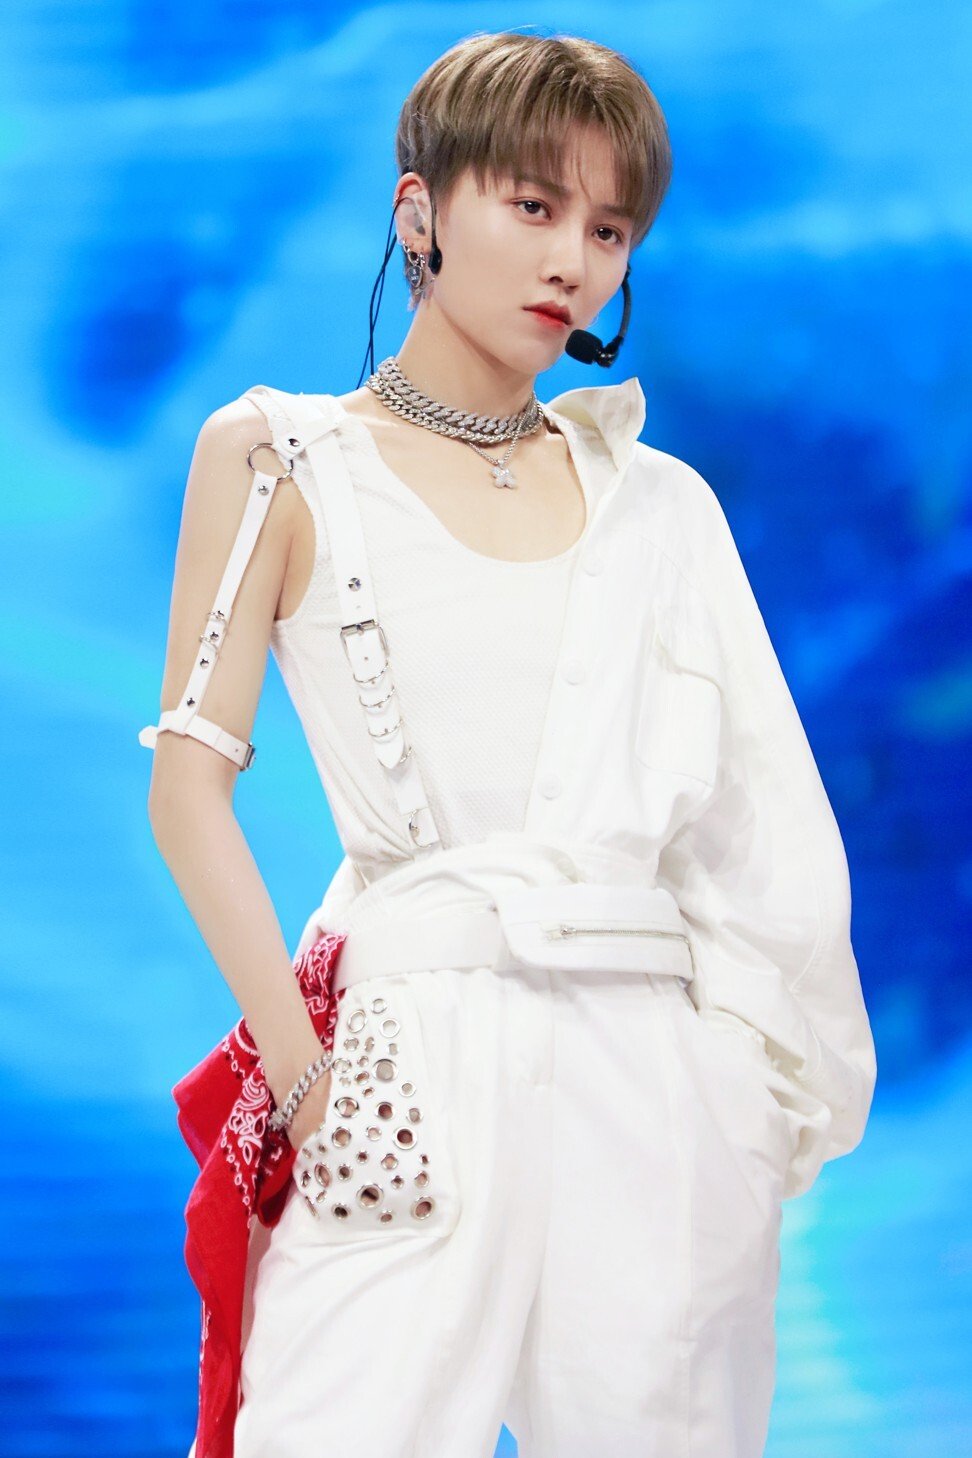 Liu was by far the most popular member of THE9 after receiving 17 million public votes on Youth With You Season 2, more than any other contestant. Photo: iQiyi